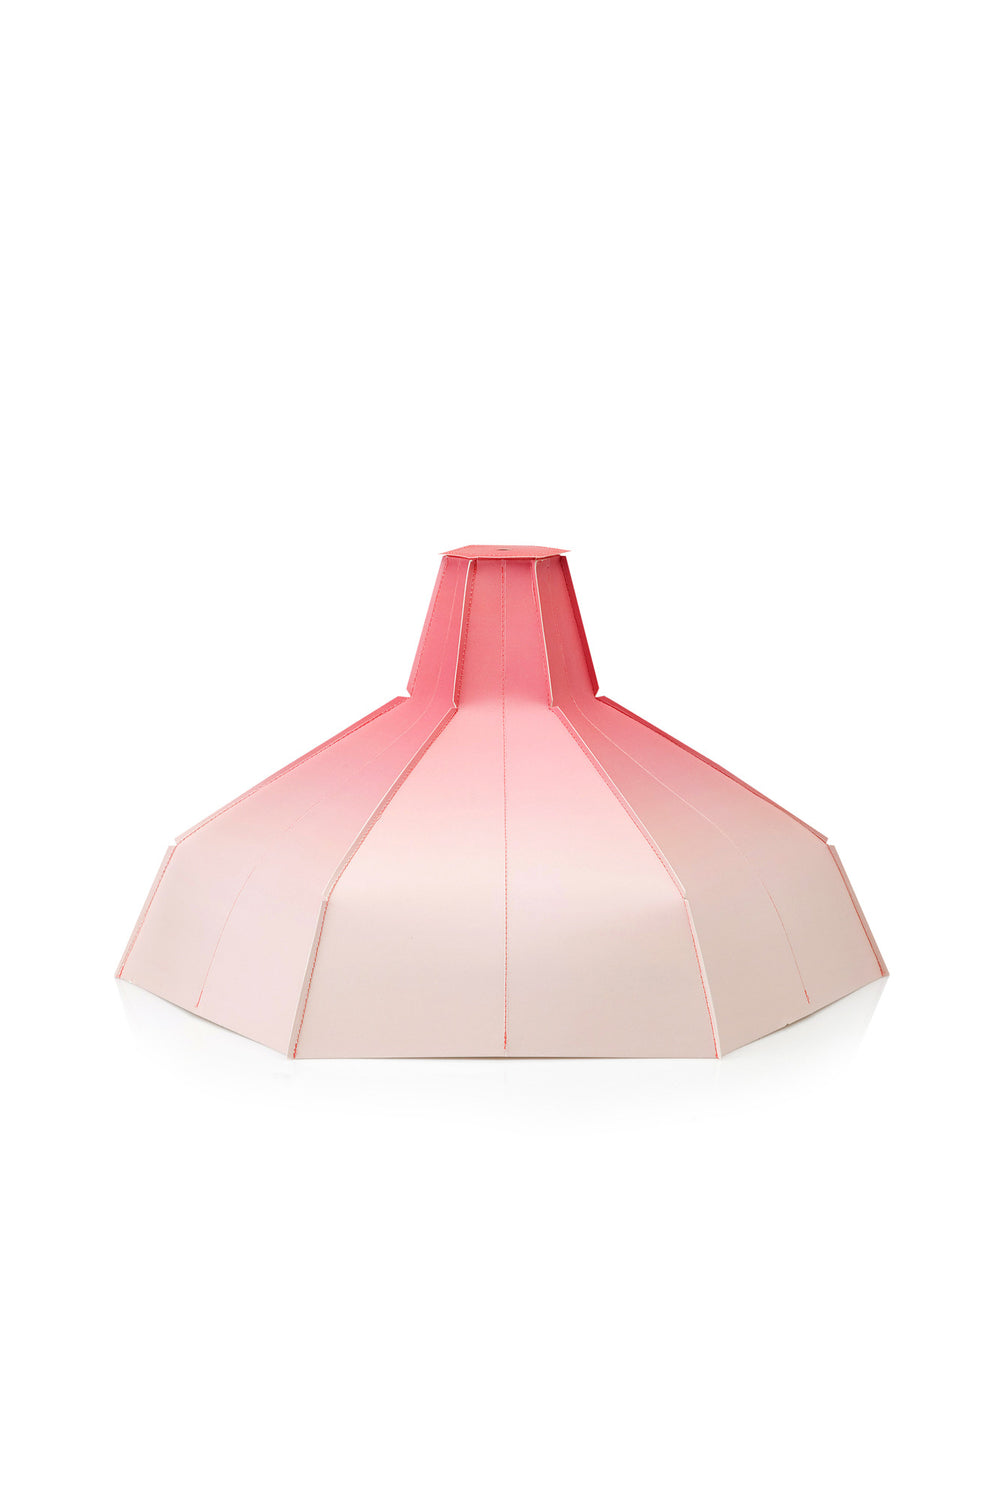 Pastel Red Lampshade, Lighting, Tiny Miracles - 3LittlePicks